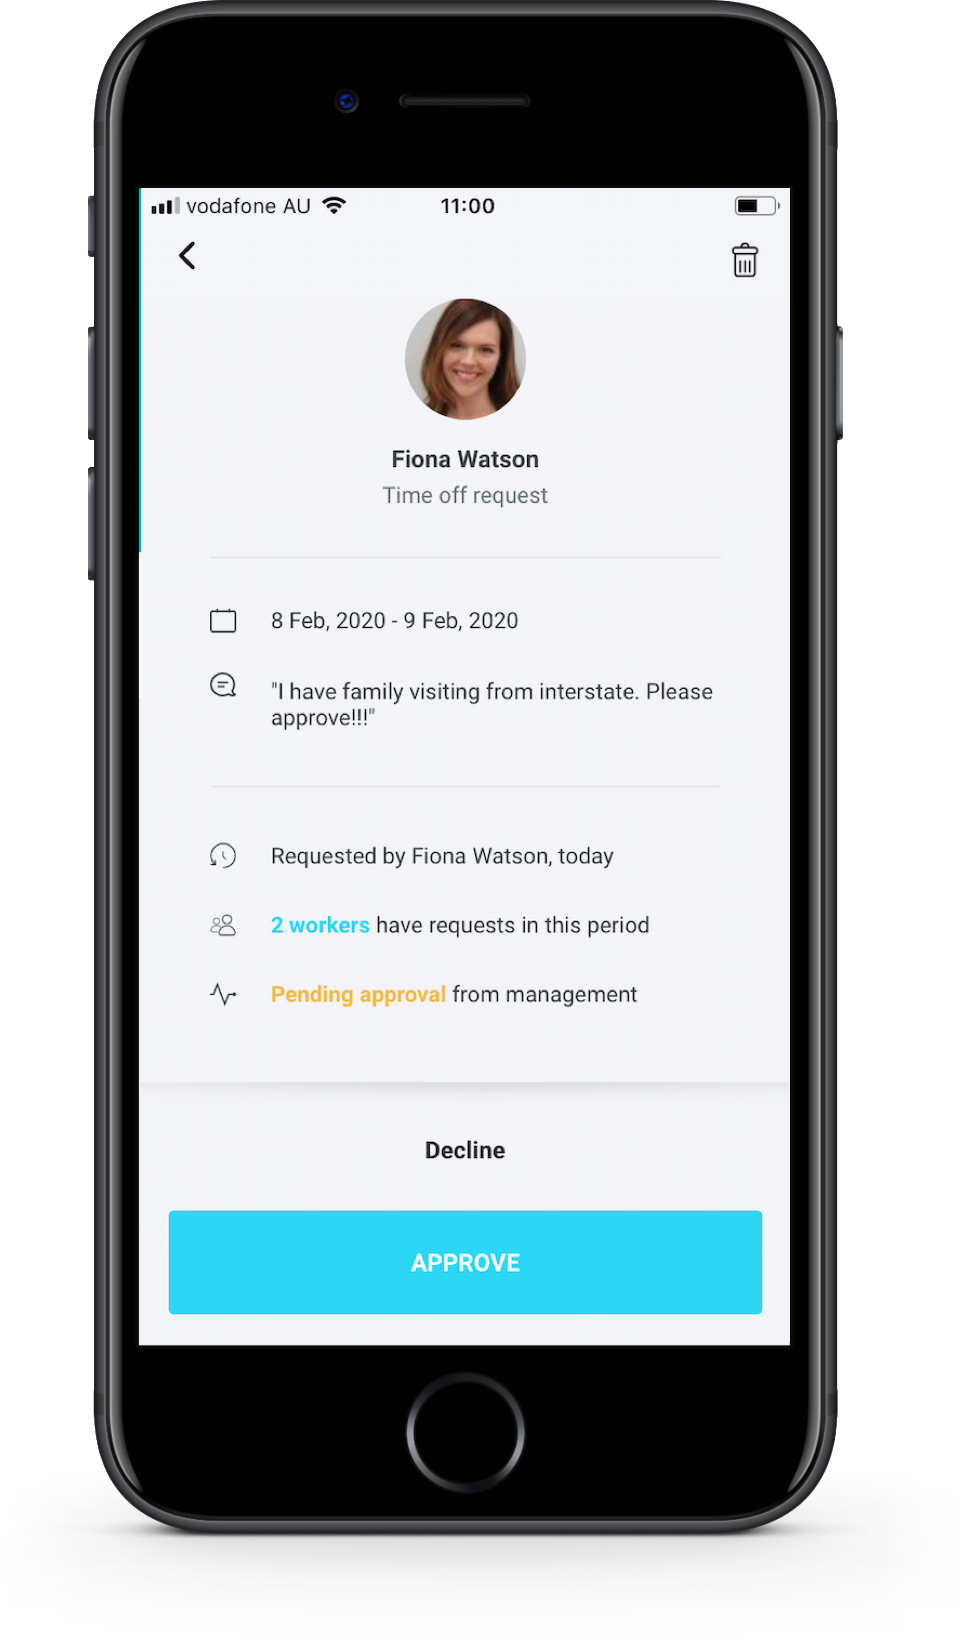 SocialSchedules Software - Worker timeoff requests, approvals and availability management